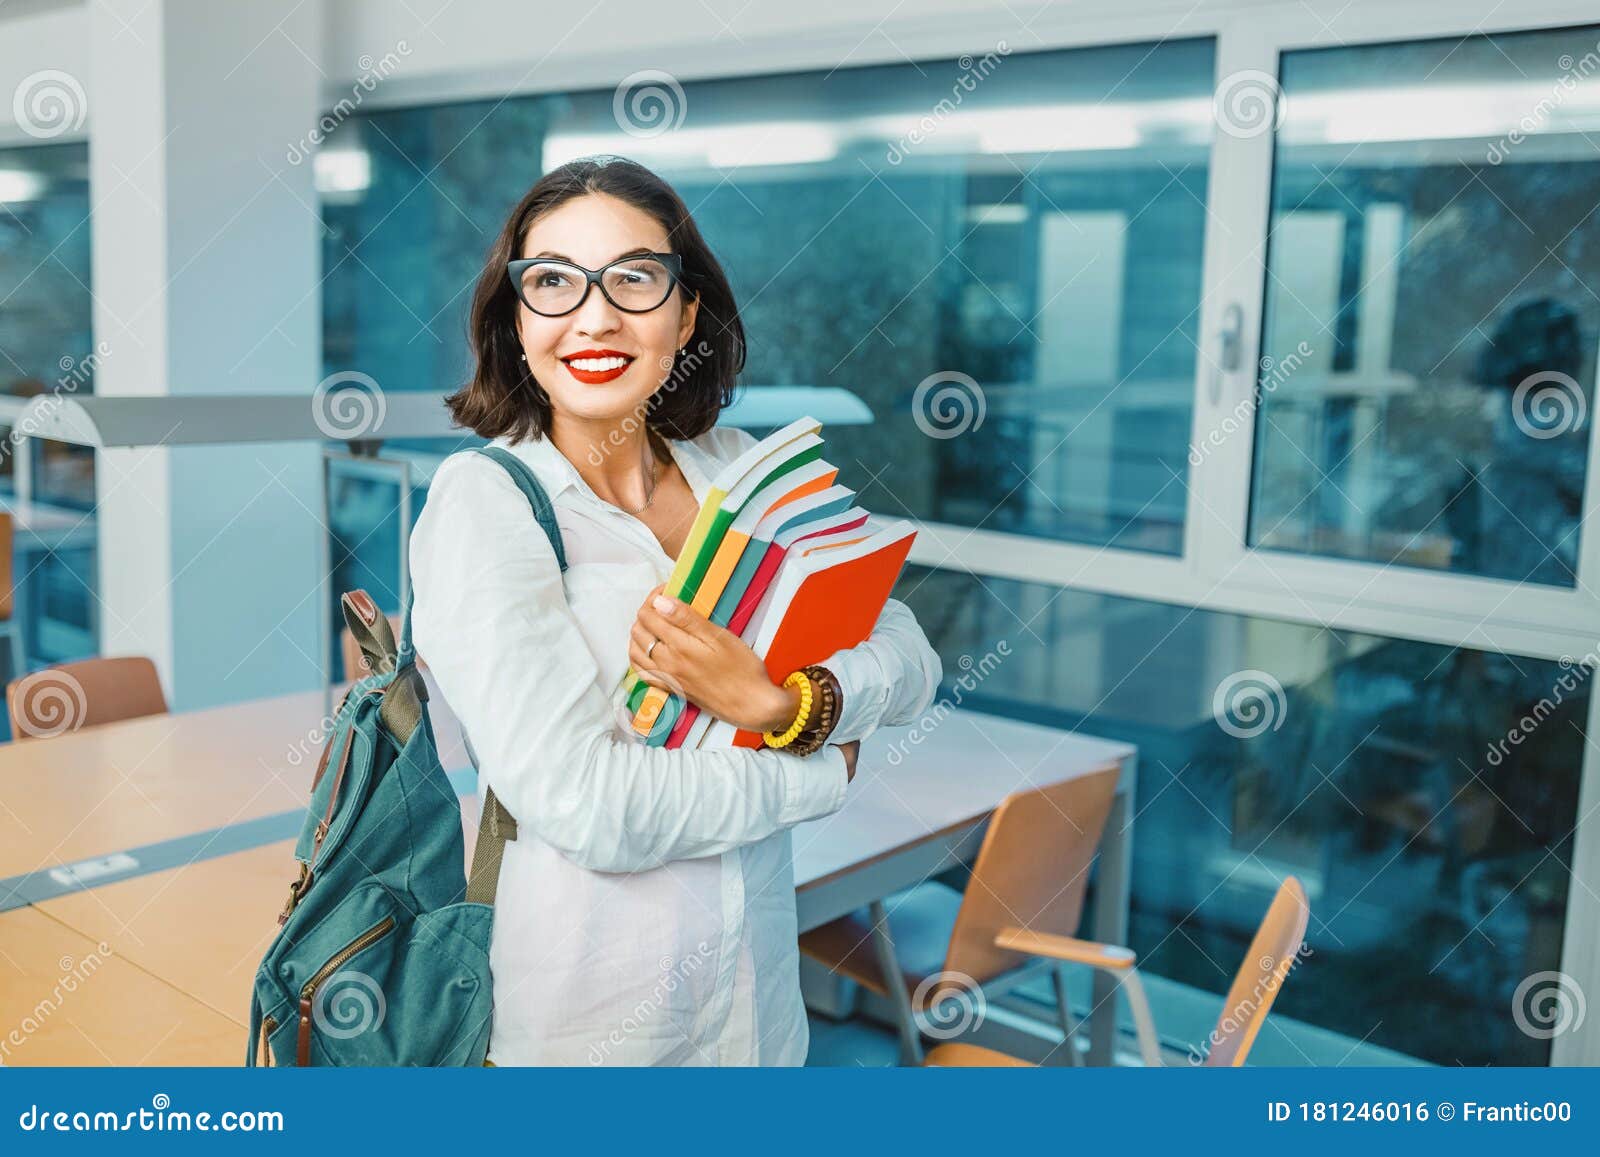 student with work books in the classroom for lectures at the university. concept of teaching and learning